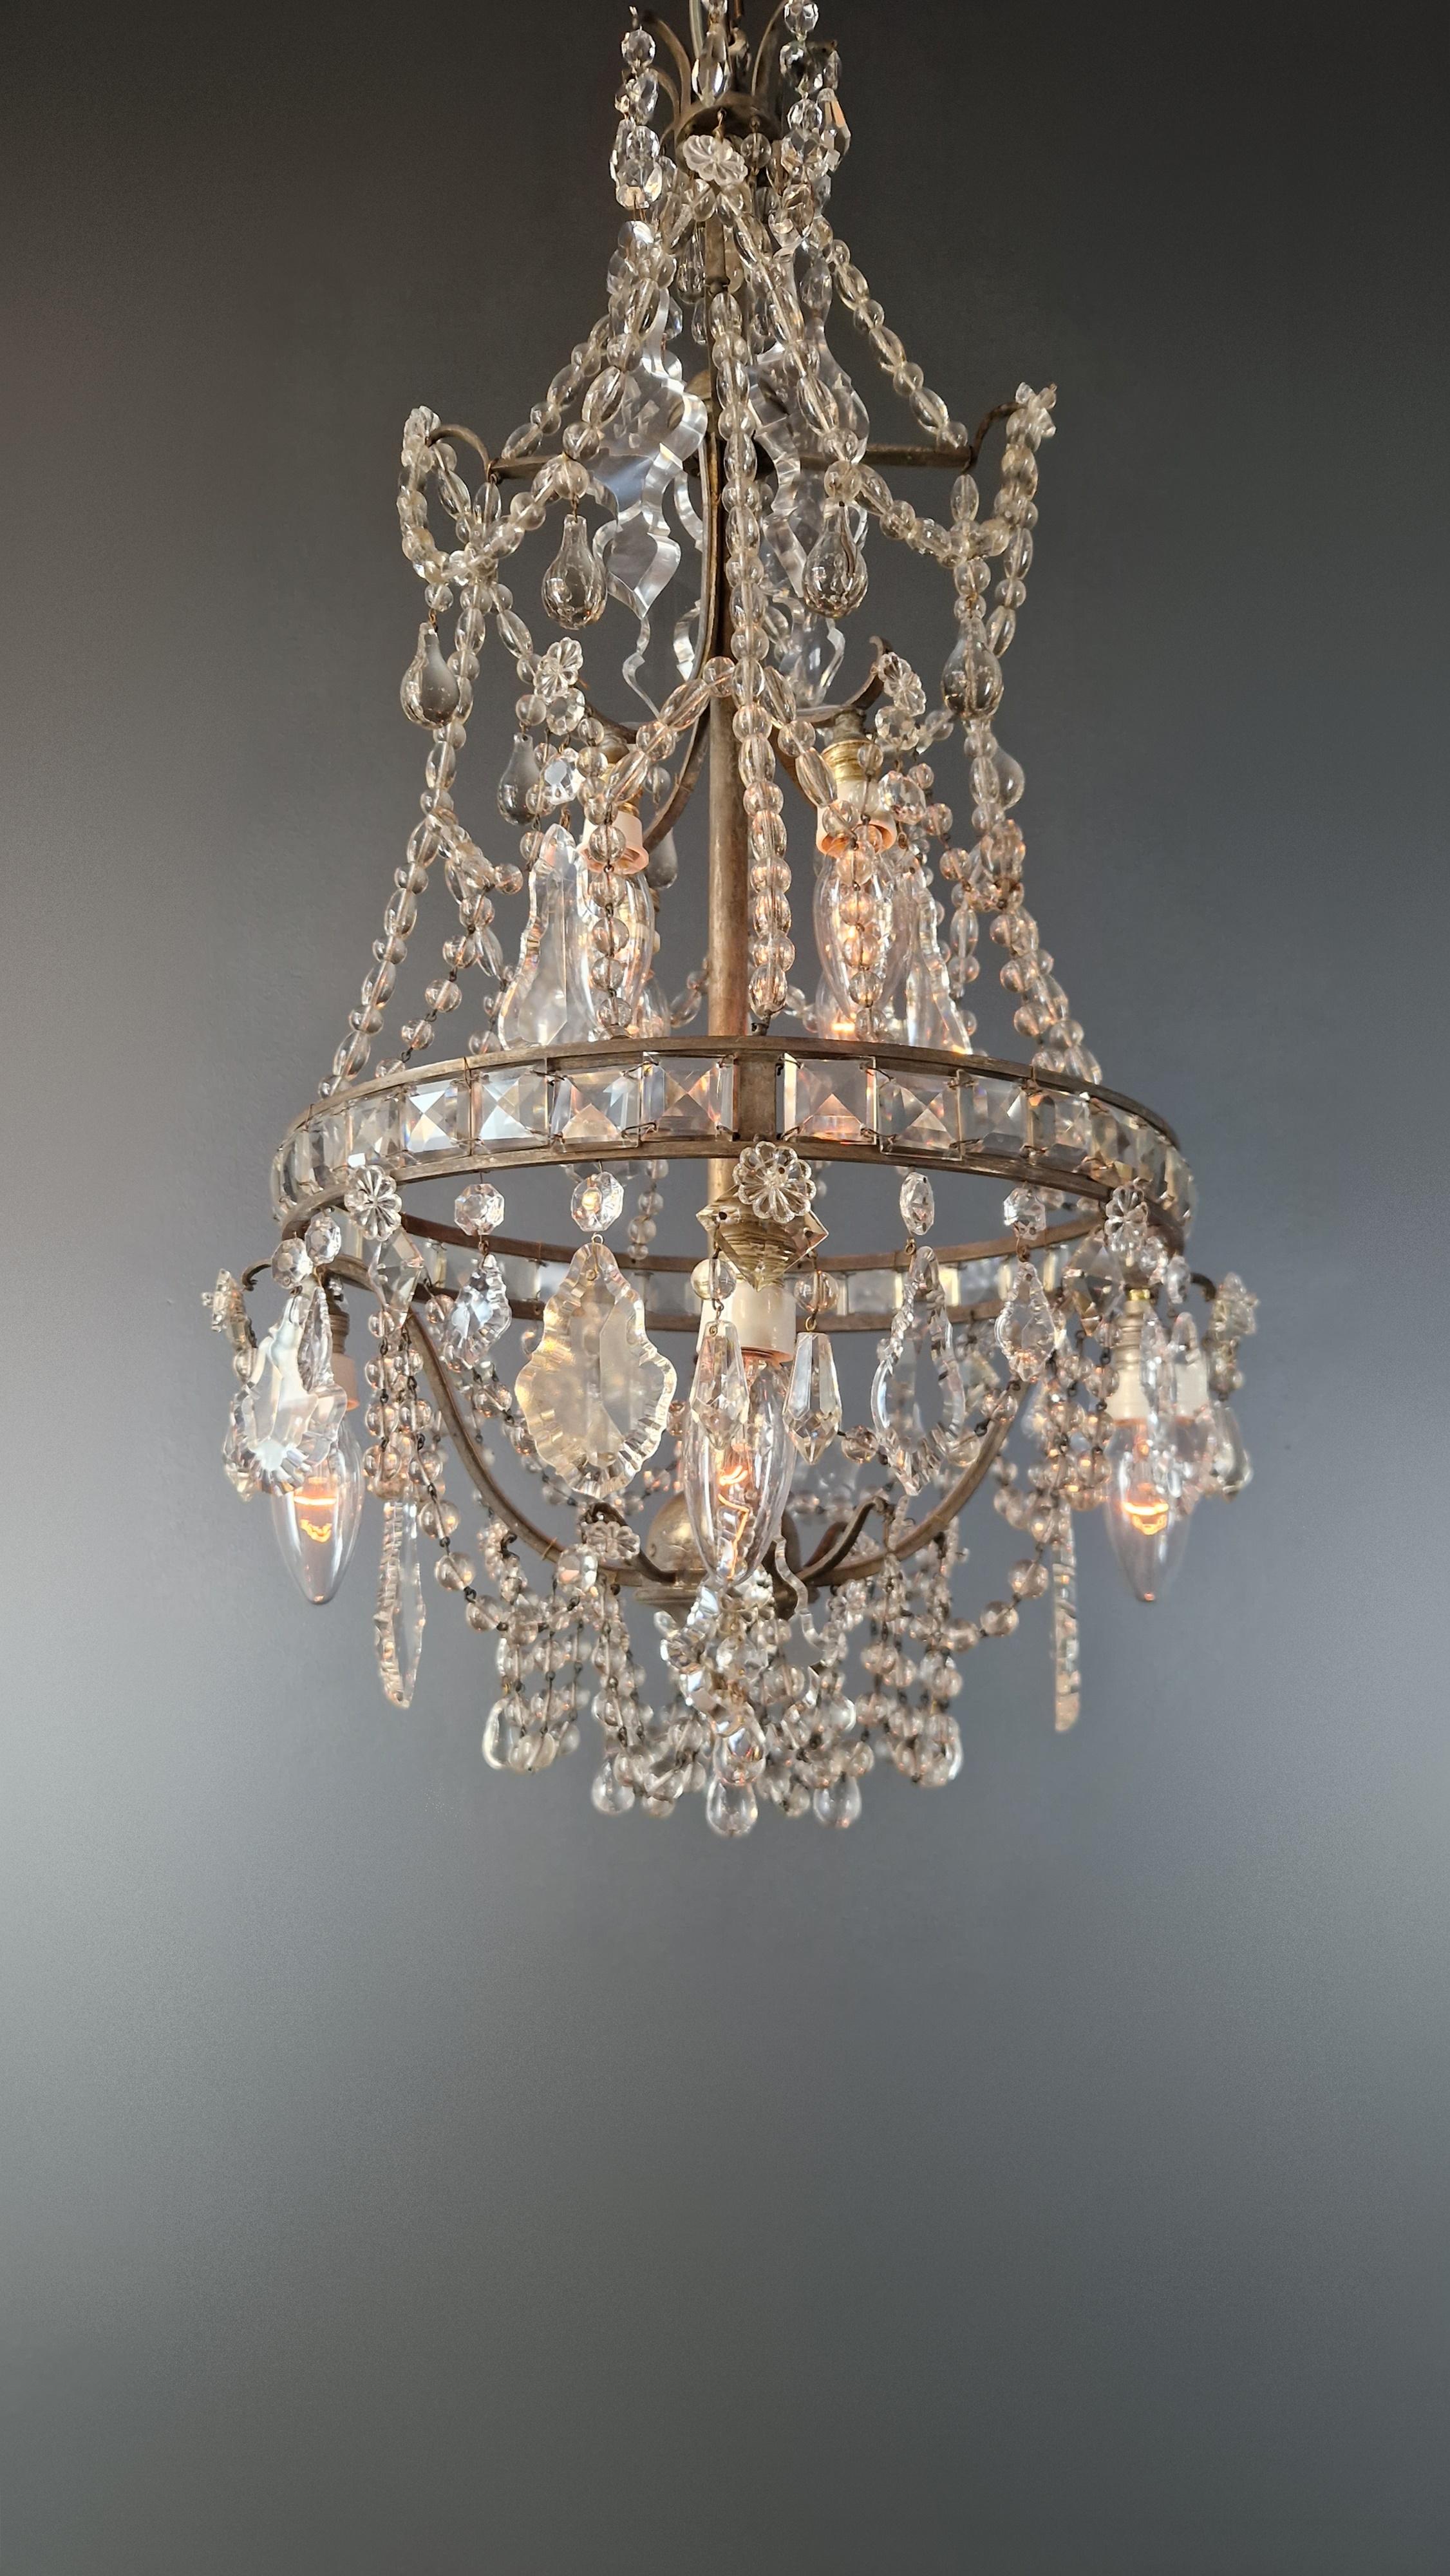 Early 20th Century Lustre A Cage Antique Art Nouveau Brass Ceiling Crystal Chandelier For Sale